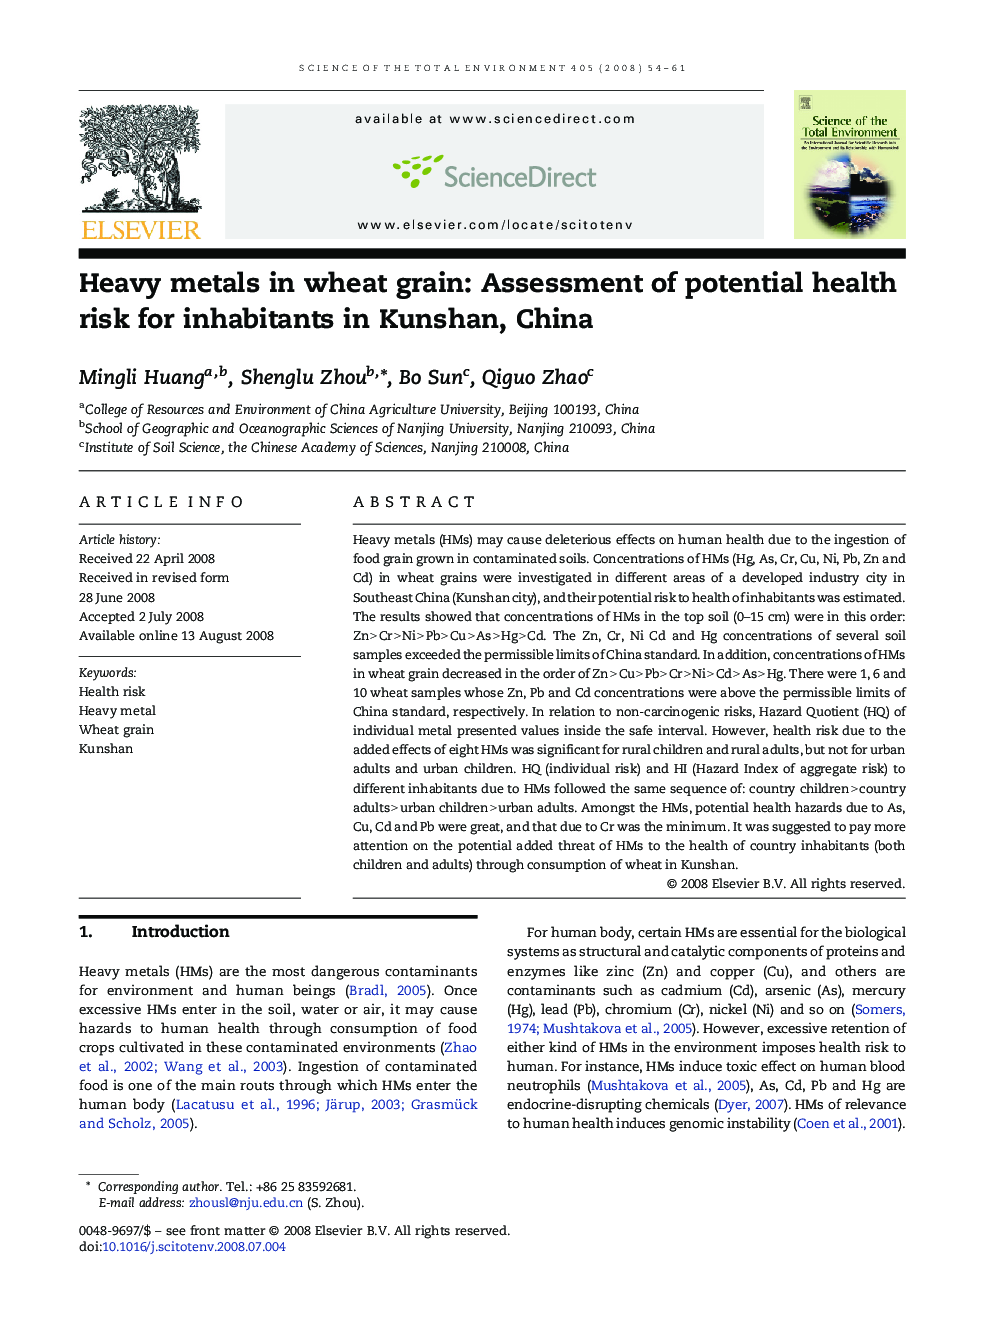 Heavy metals in wheat grain: Assessment of potential health risk for inhabitants in Kunshan, China